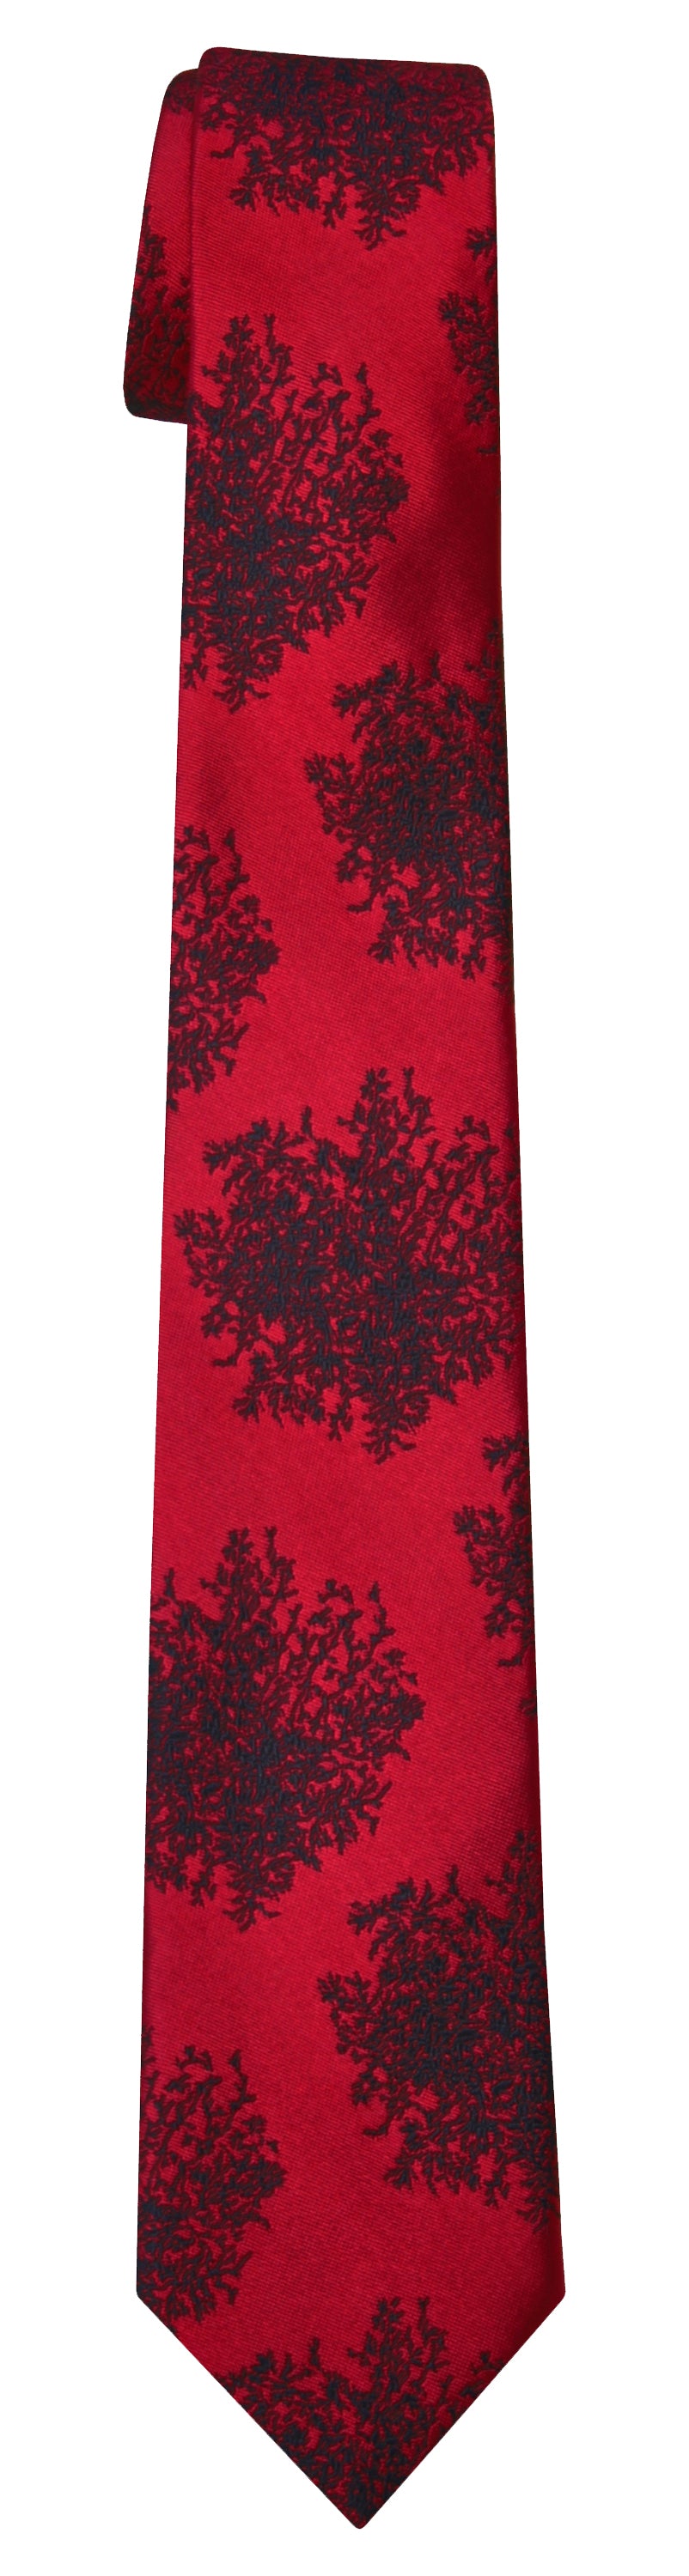 Mimi Fong Moss Tie in Red